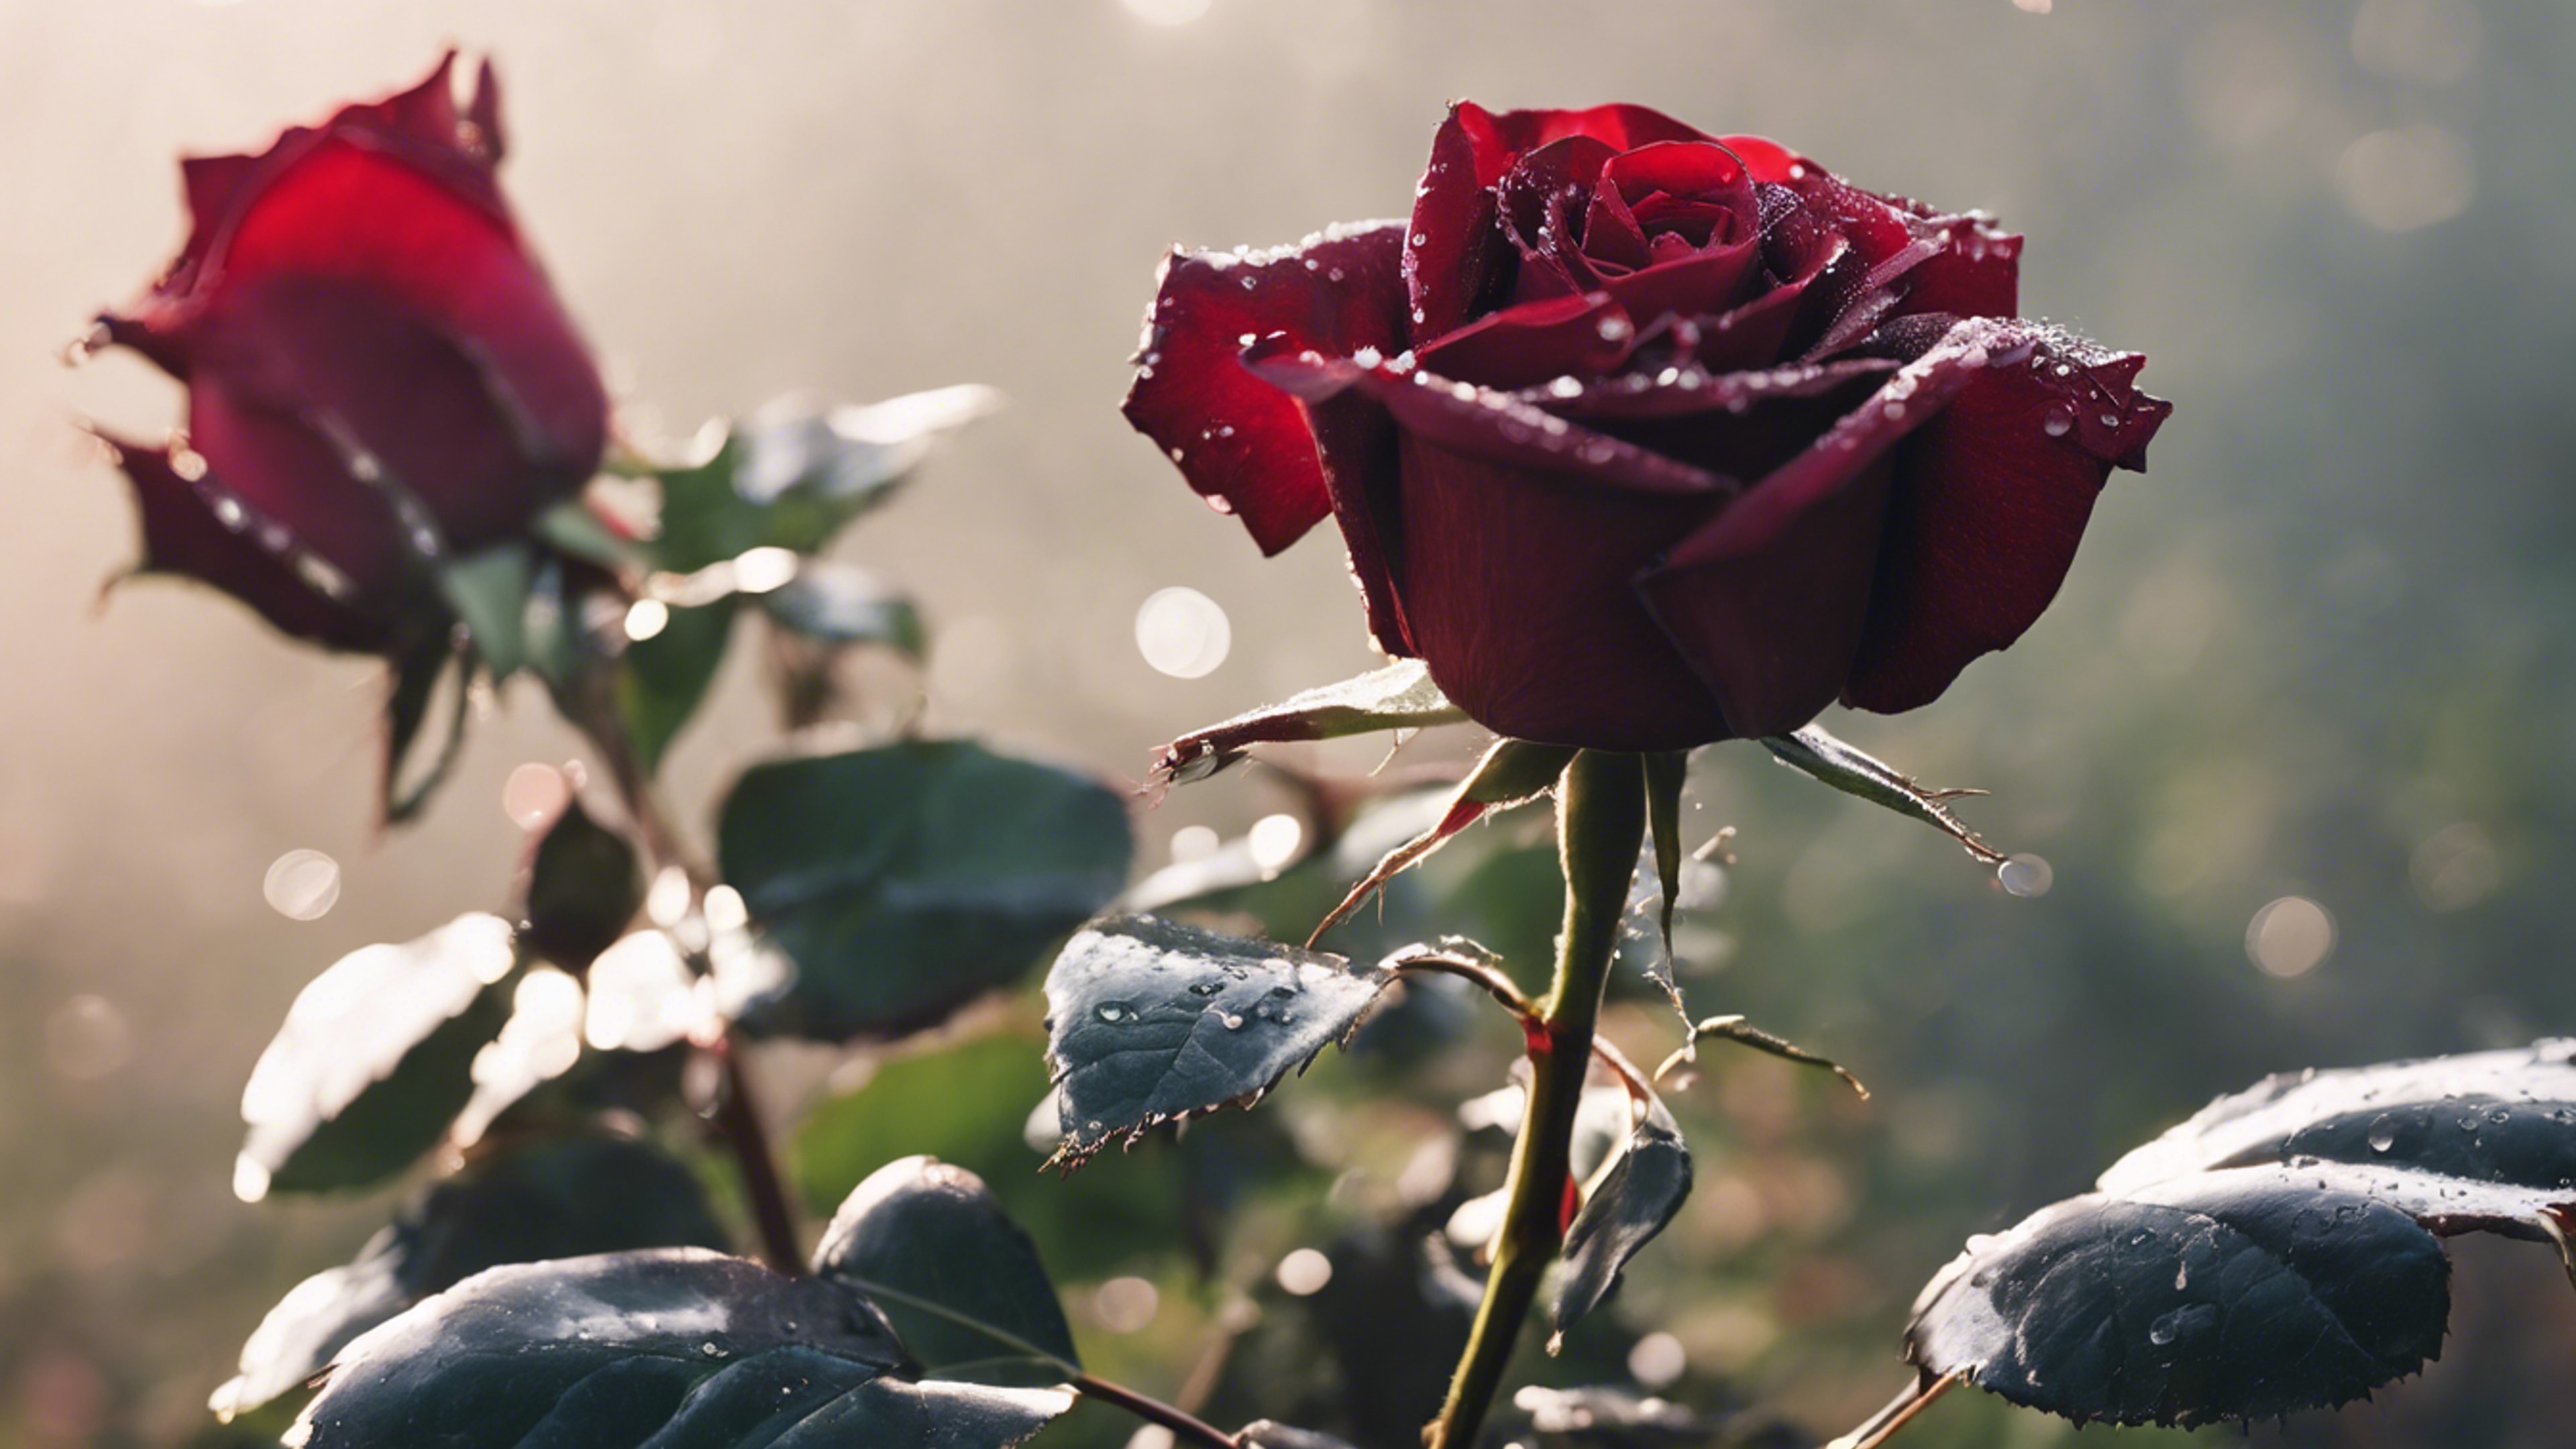 A lush dark red rose in full bloom, glistening with morning dew. Tapetai[3308270db75d4dd78aa2]